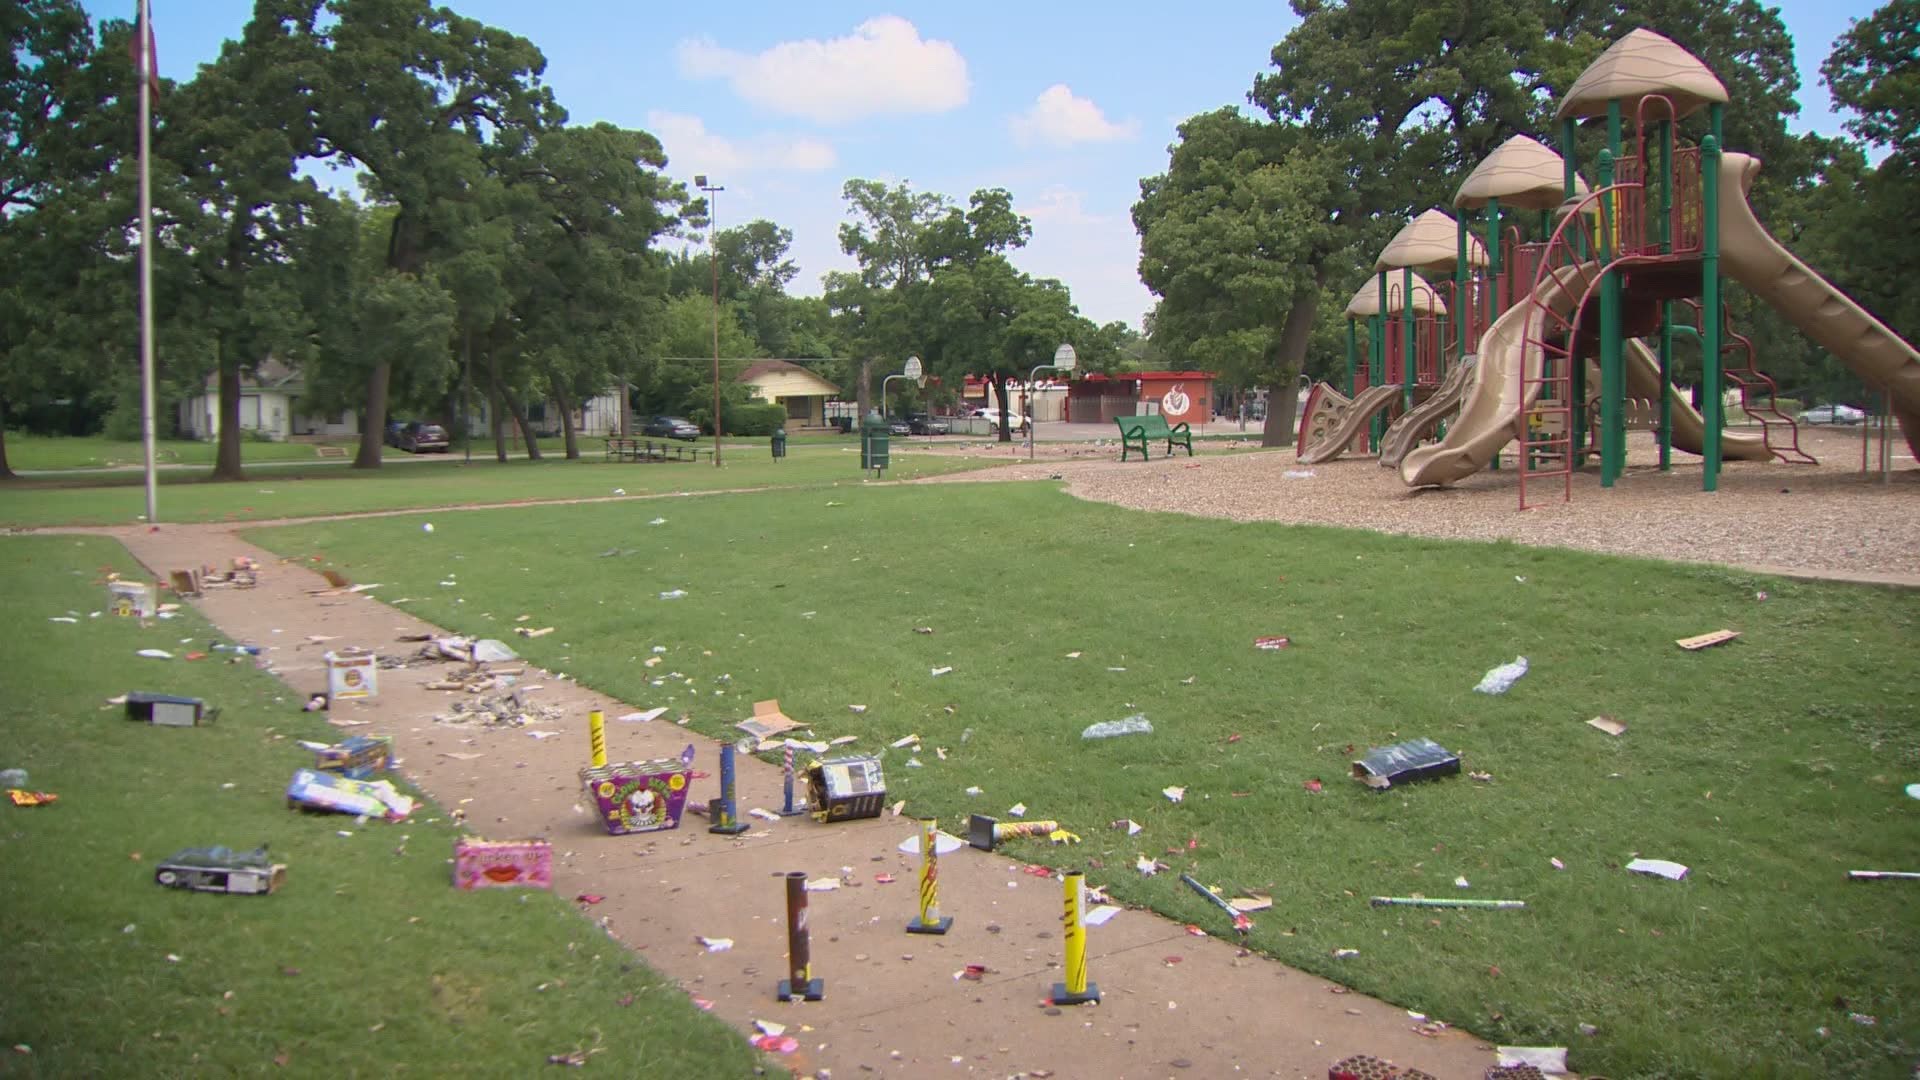 Dallas police said they issued 17 citations for illegal fireworks and seized more than 1,000 pounds of fireworks over the holiday weekend.